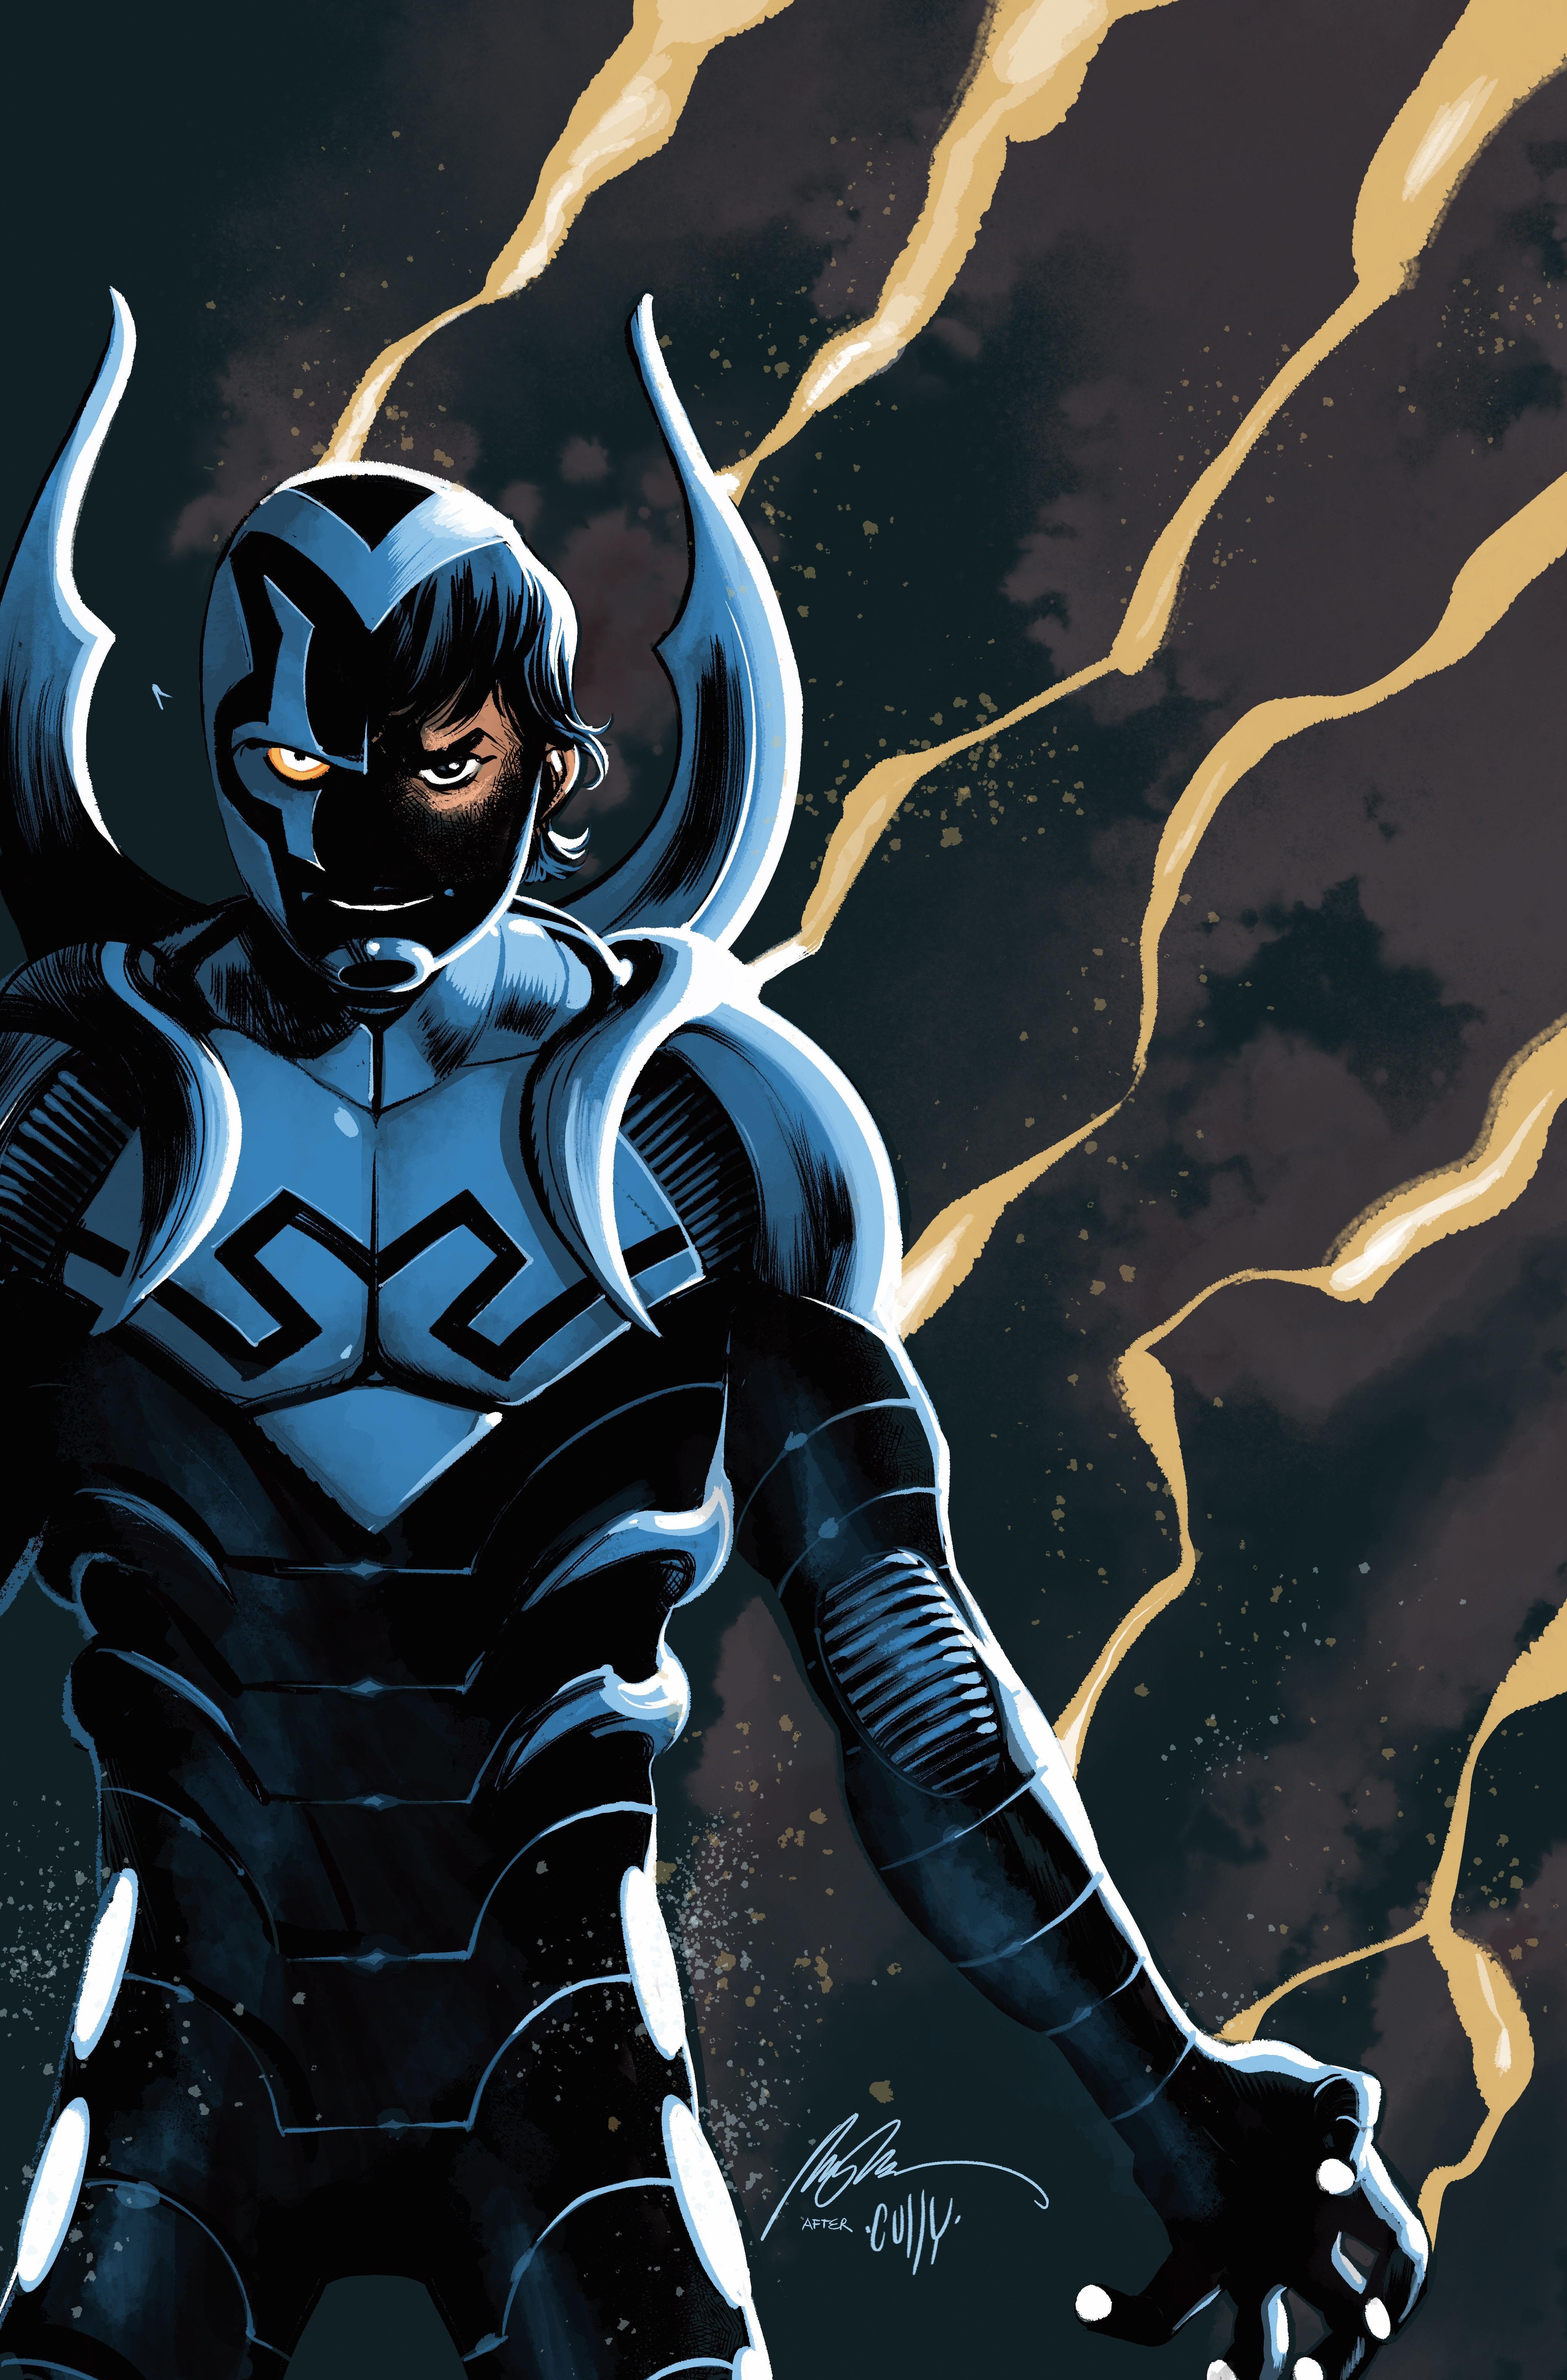 The New Blue Beetle - Comic Book Revolution